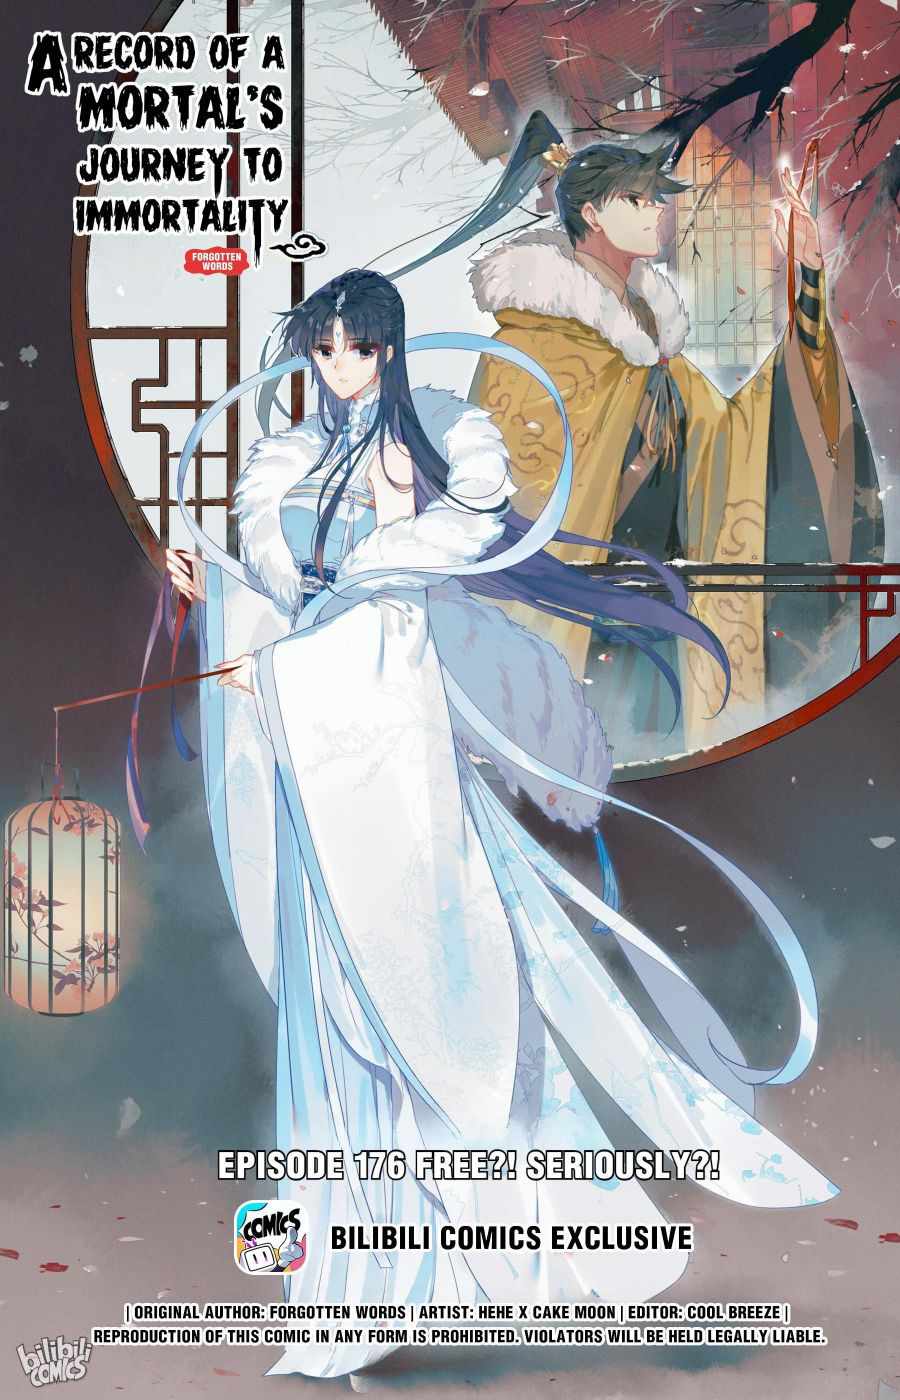 Mortal's Cultivation: journey to immortality Chapter 176